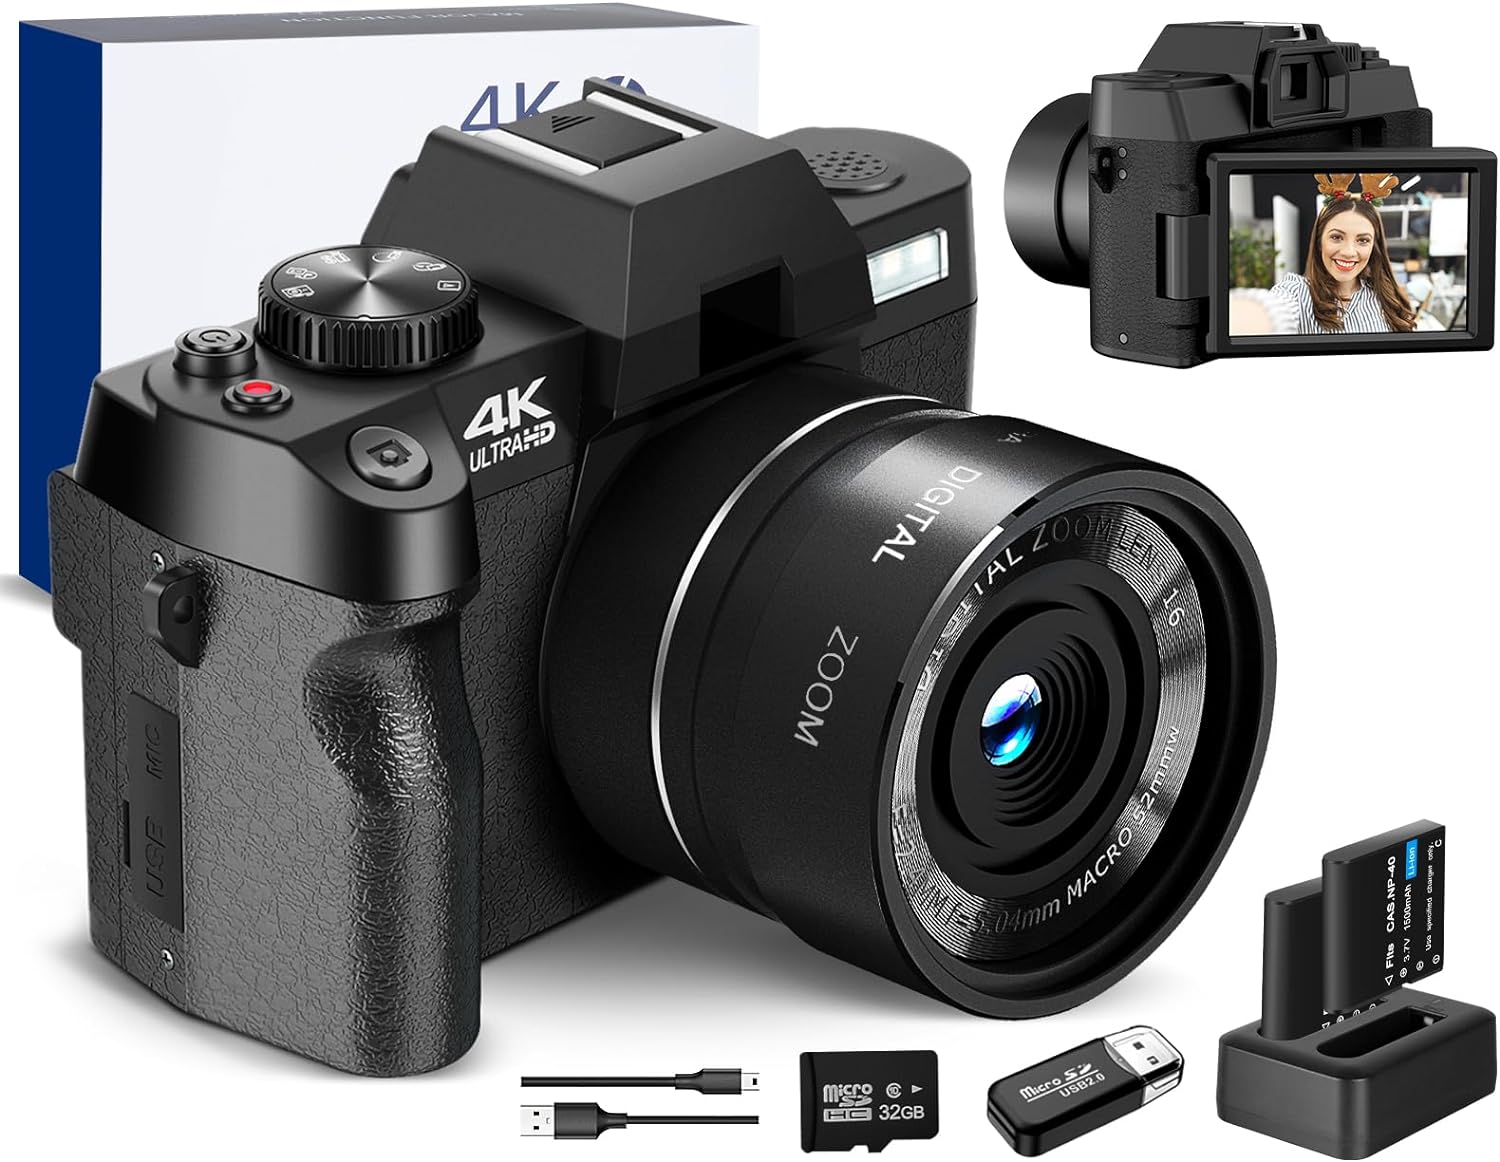 ATPLOES 4K Digital Camera Review: Feature-Packed for Photography and Vlogging